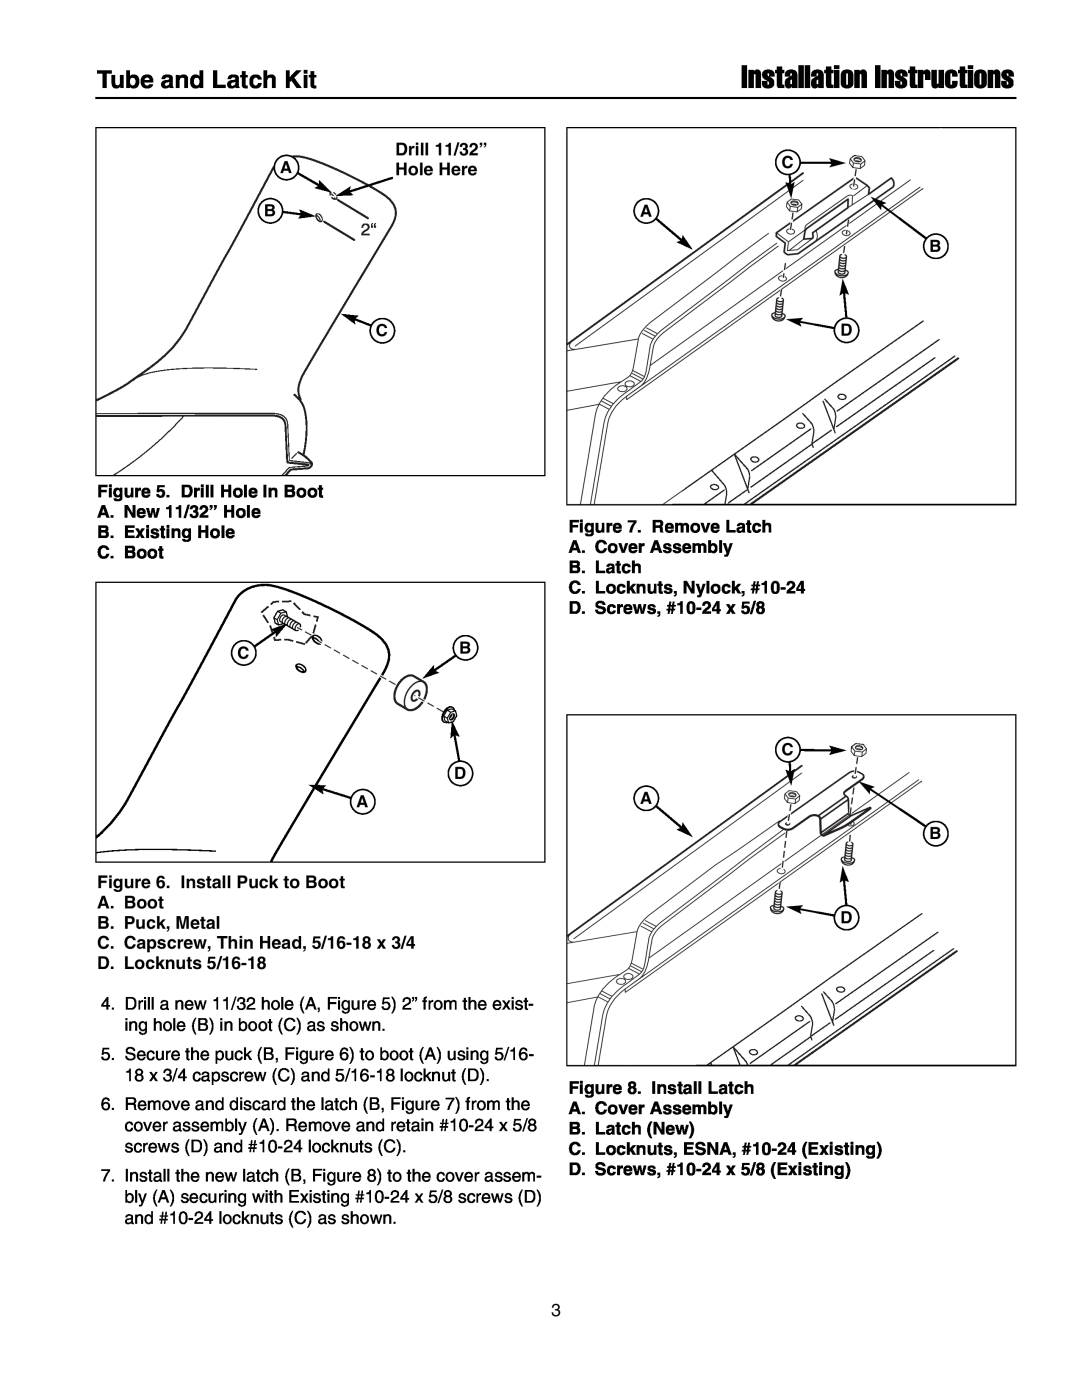 Snapper 1687262 installation instructions Tube and Latch Kit, Installation Instructions 